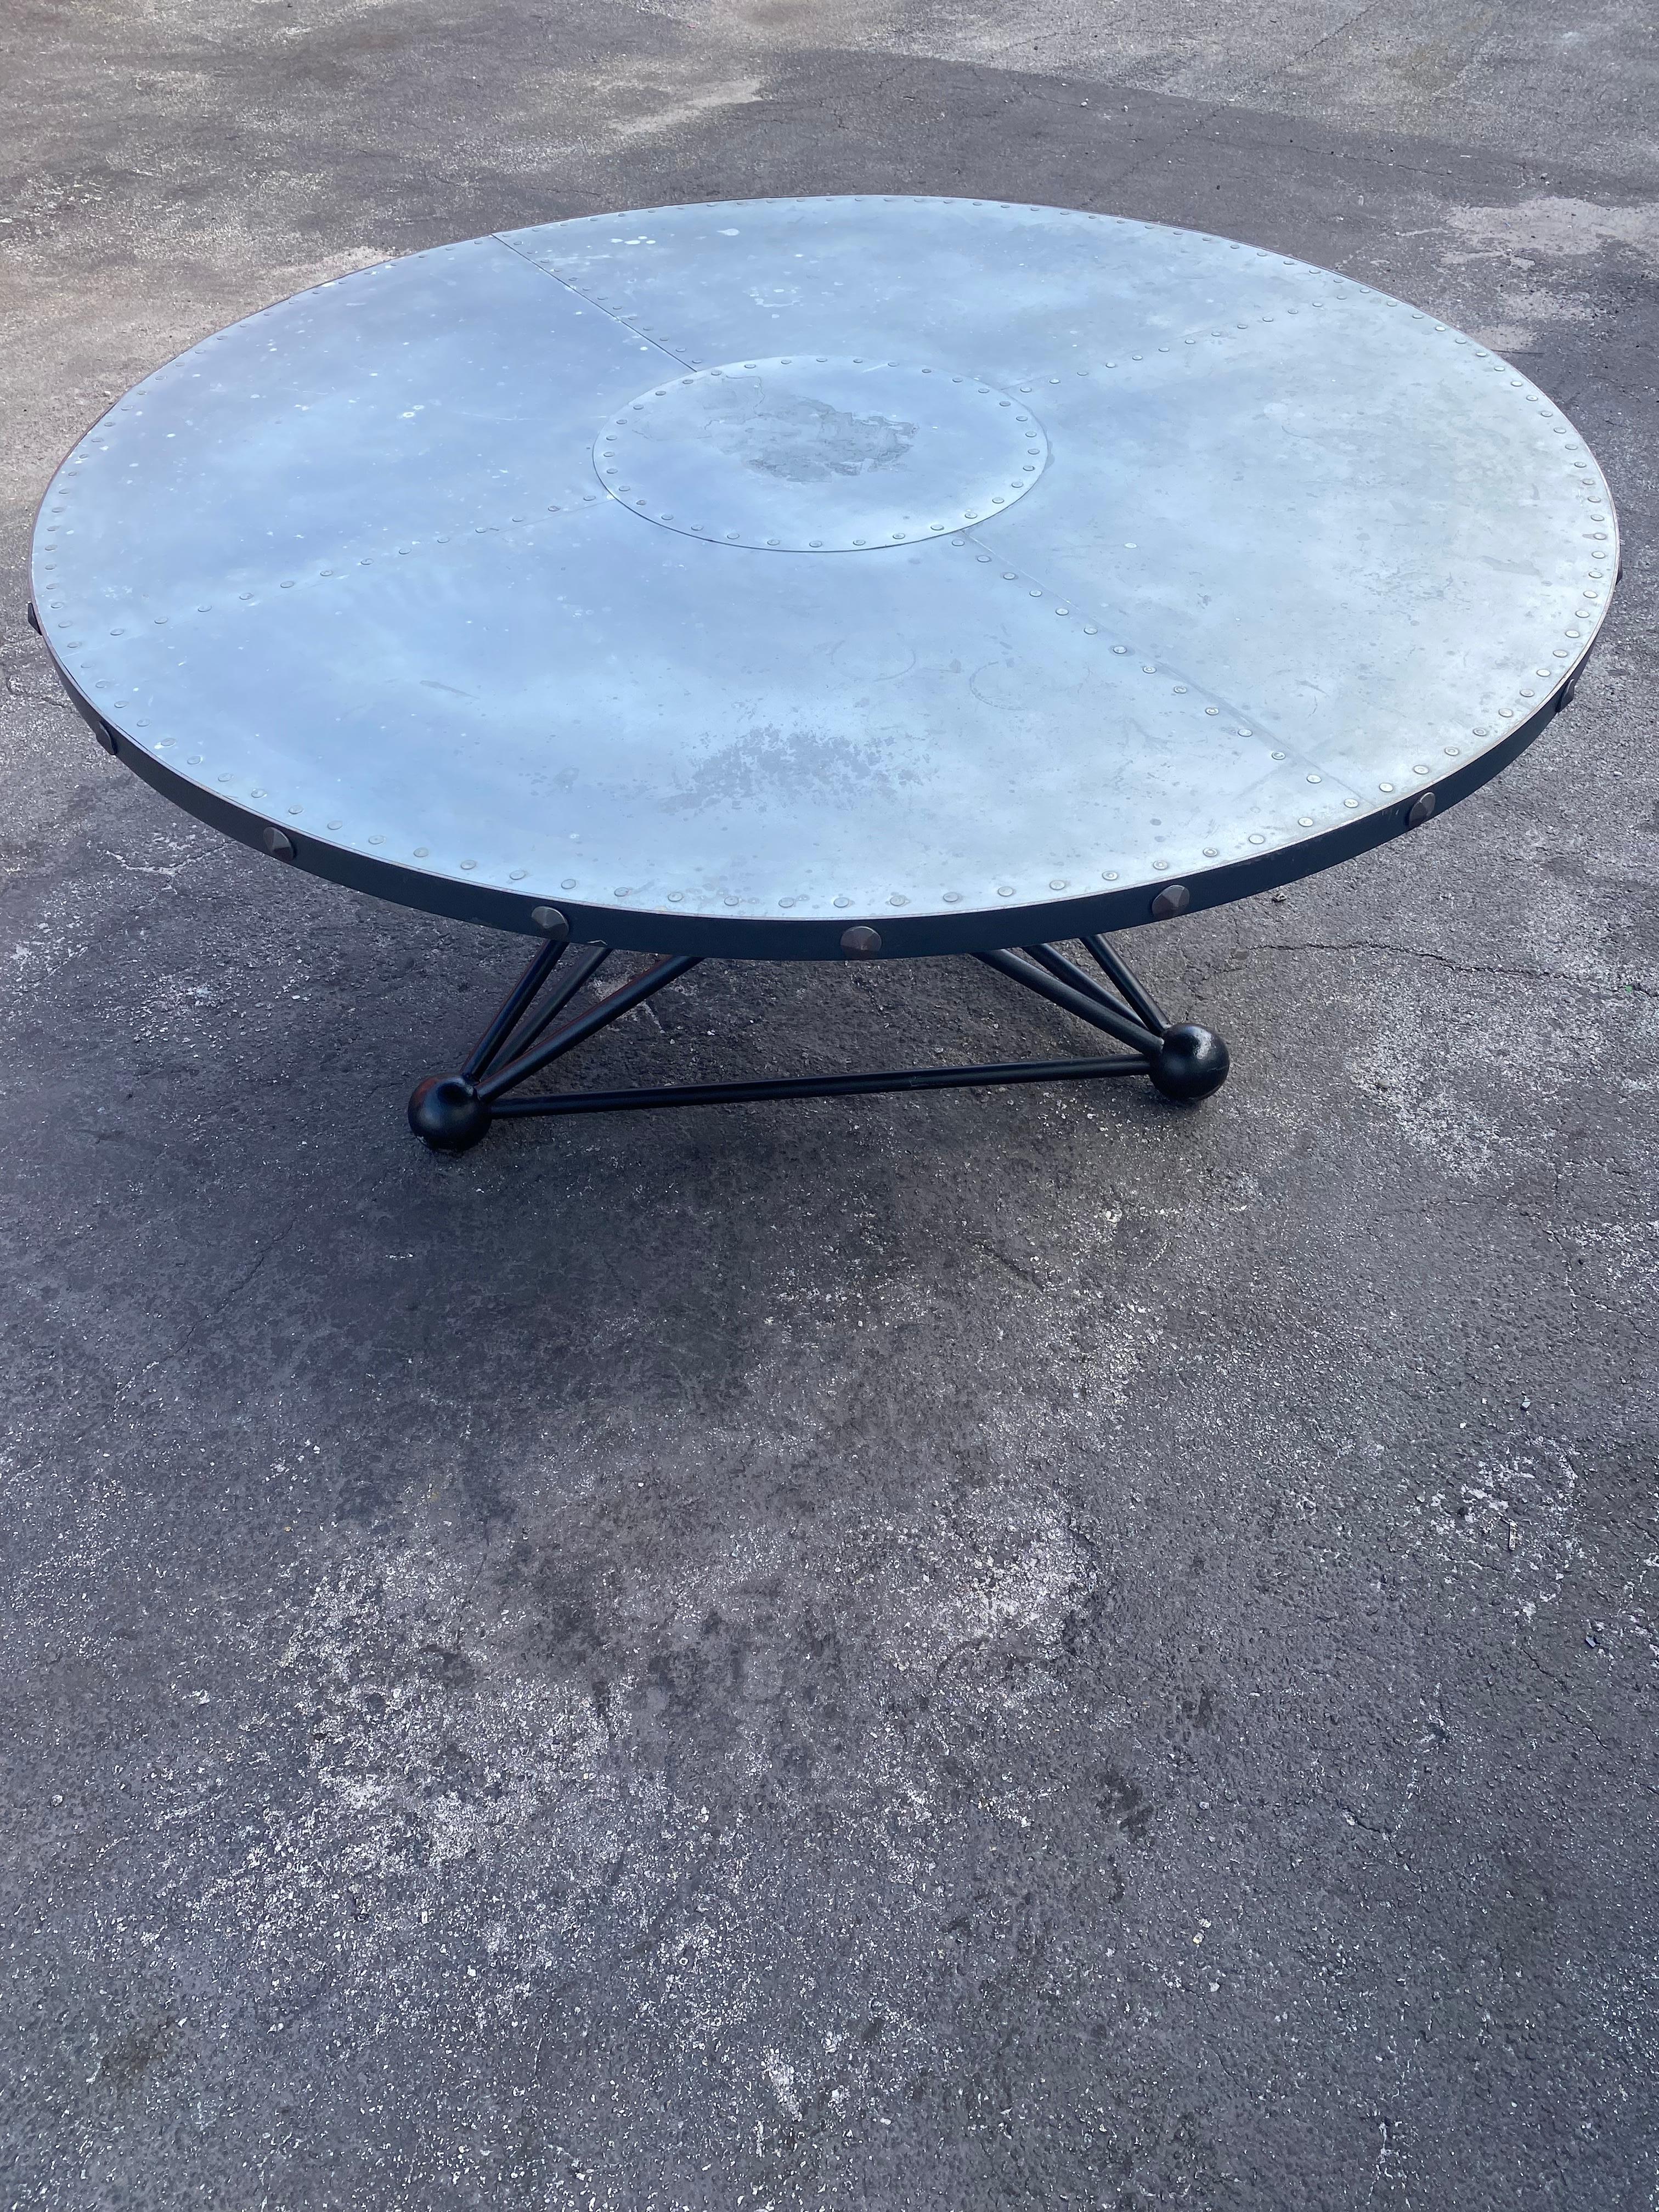 1980s Industrial Geometrical Sculptural Steel Zinc Wood Round Dining Table For Sale 4